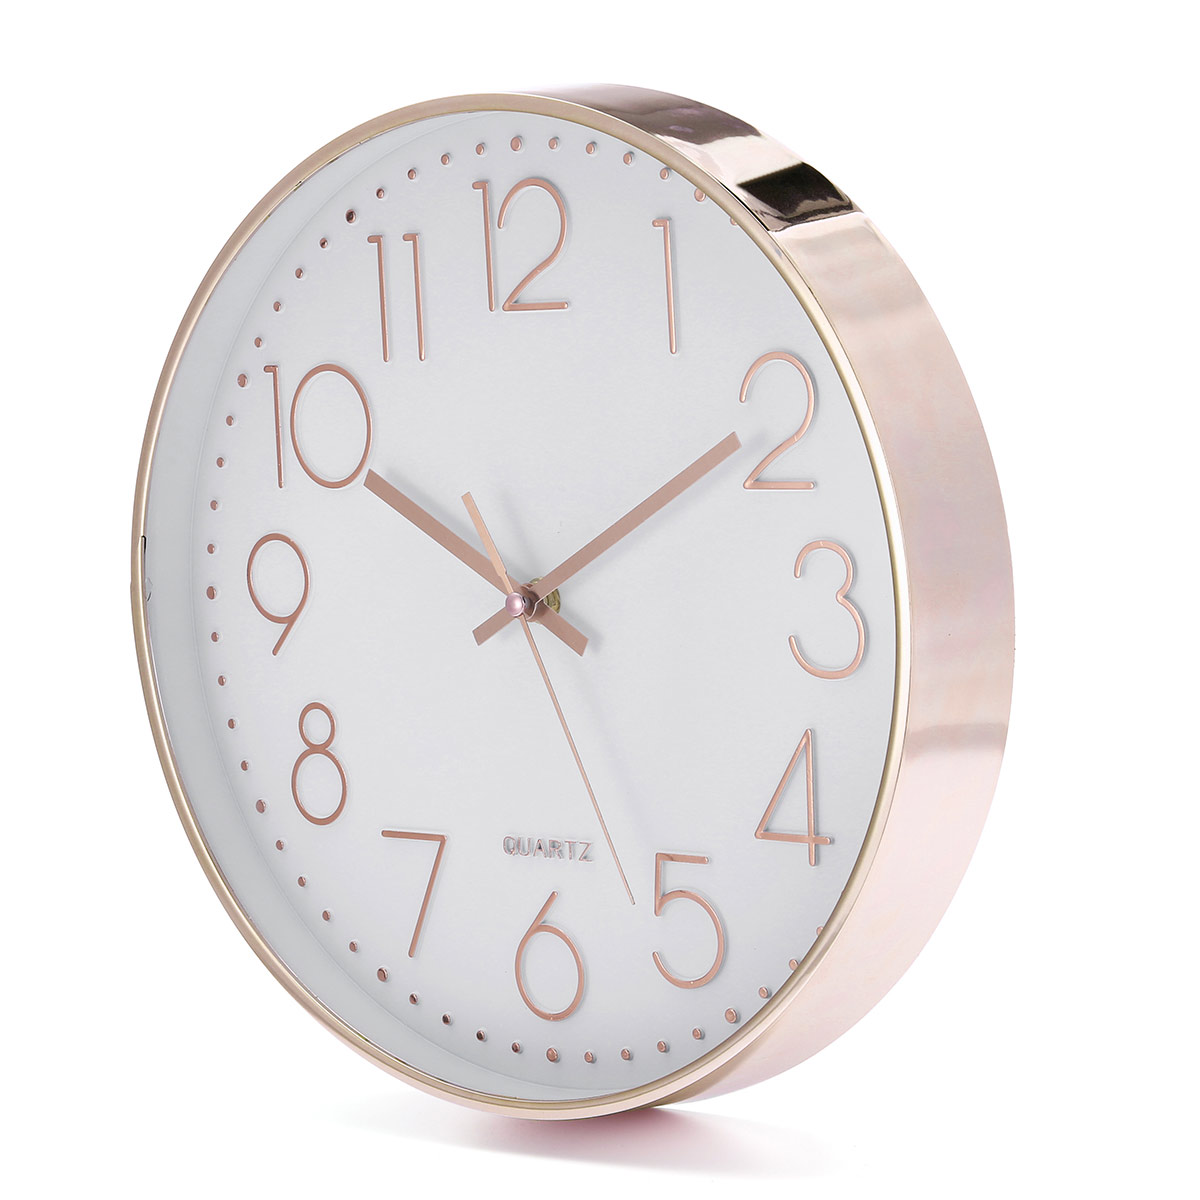 Wall Clock-12 Inch Rose Gold Silent Non Ticking Quality Operated Easy t Q3P8 1X 